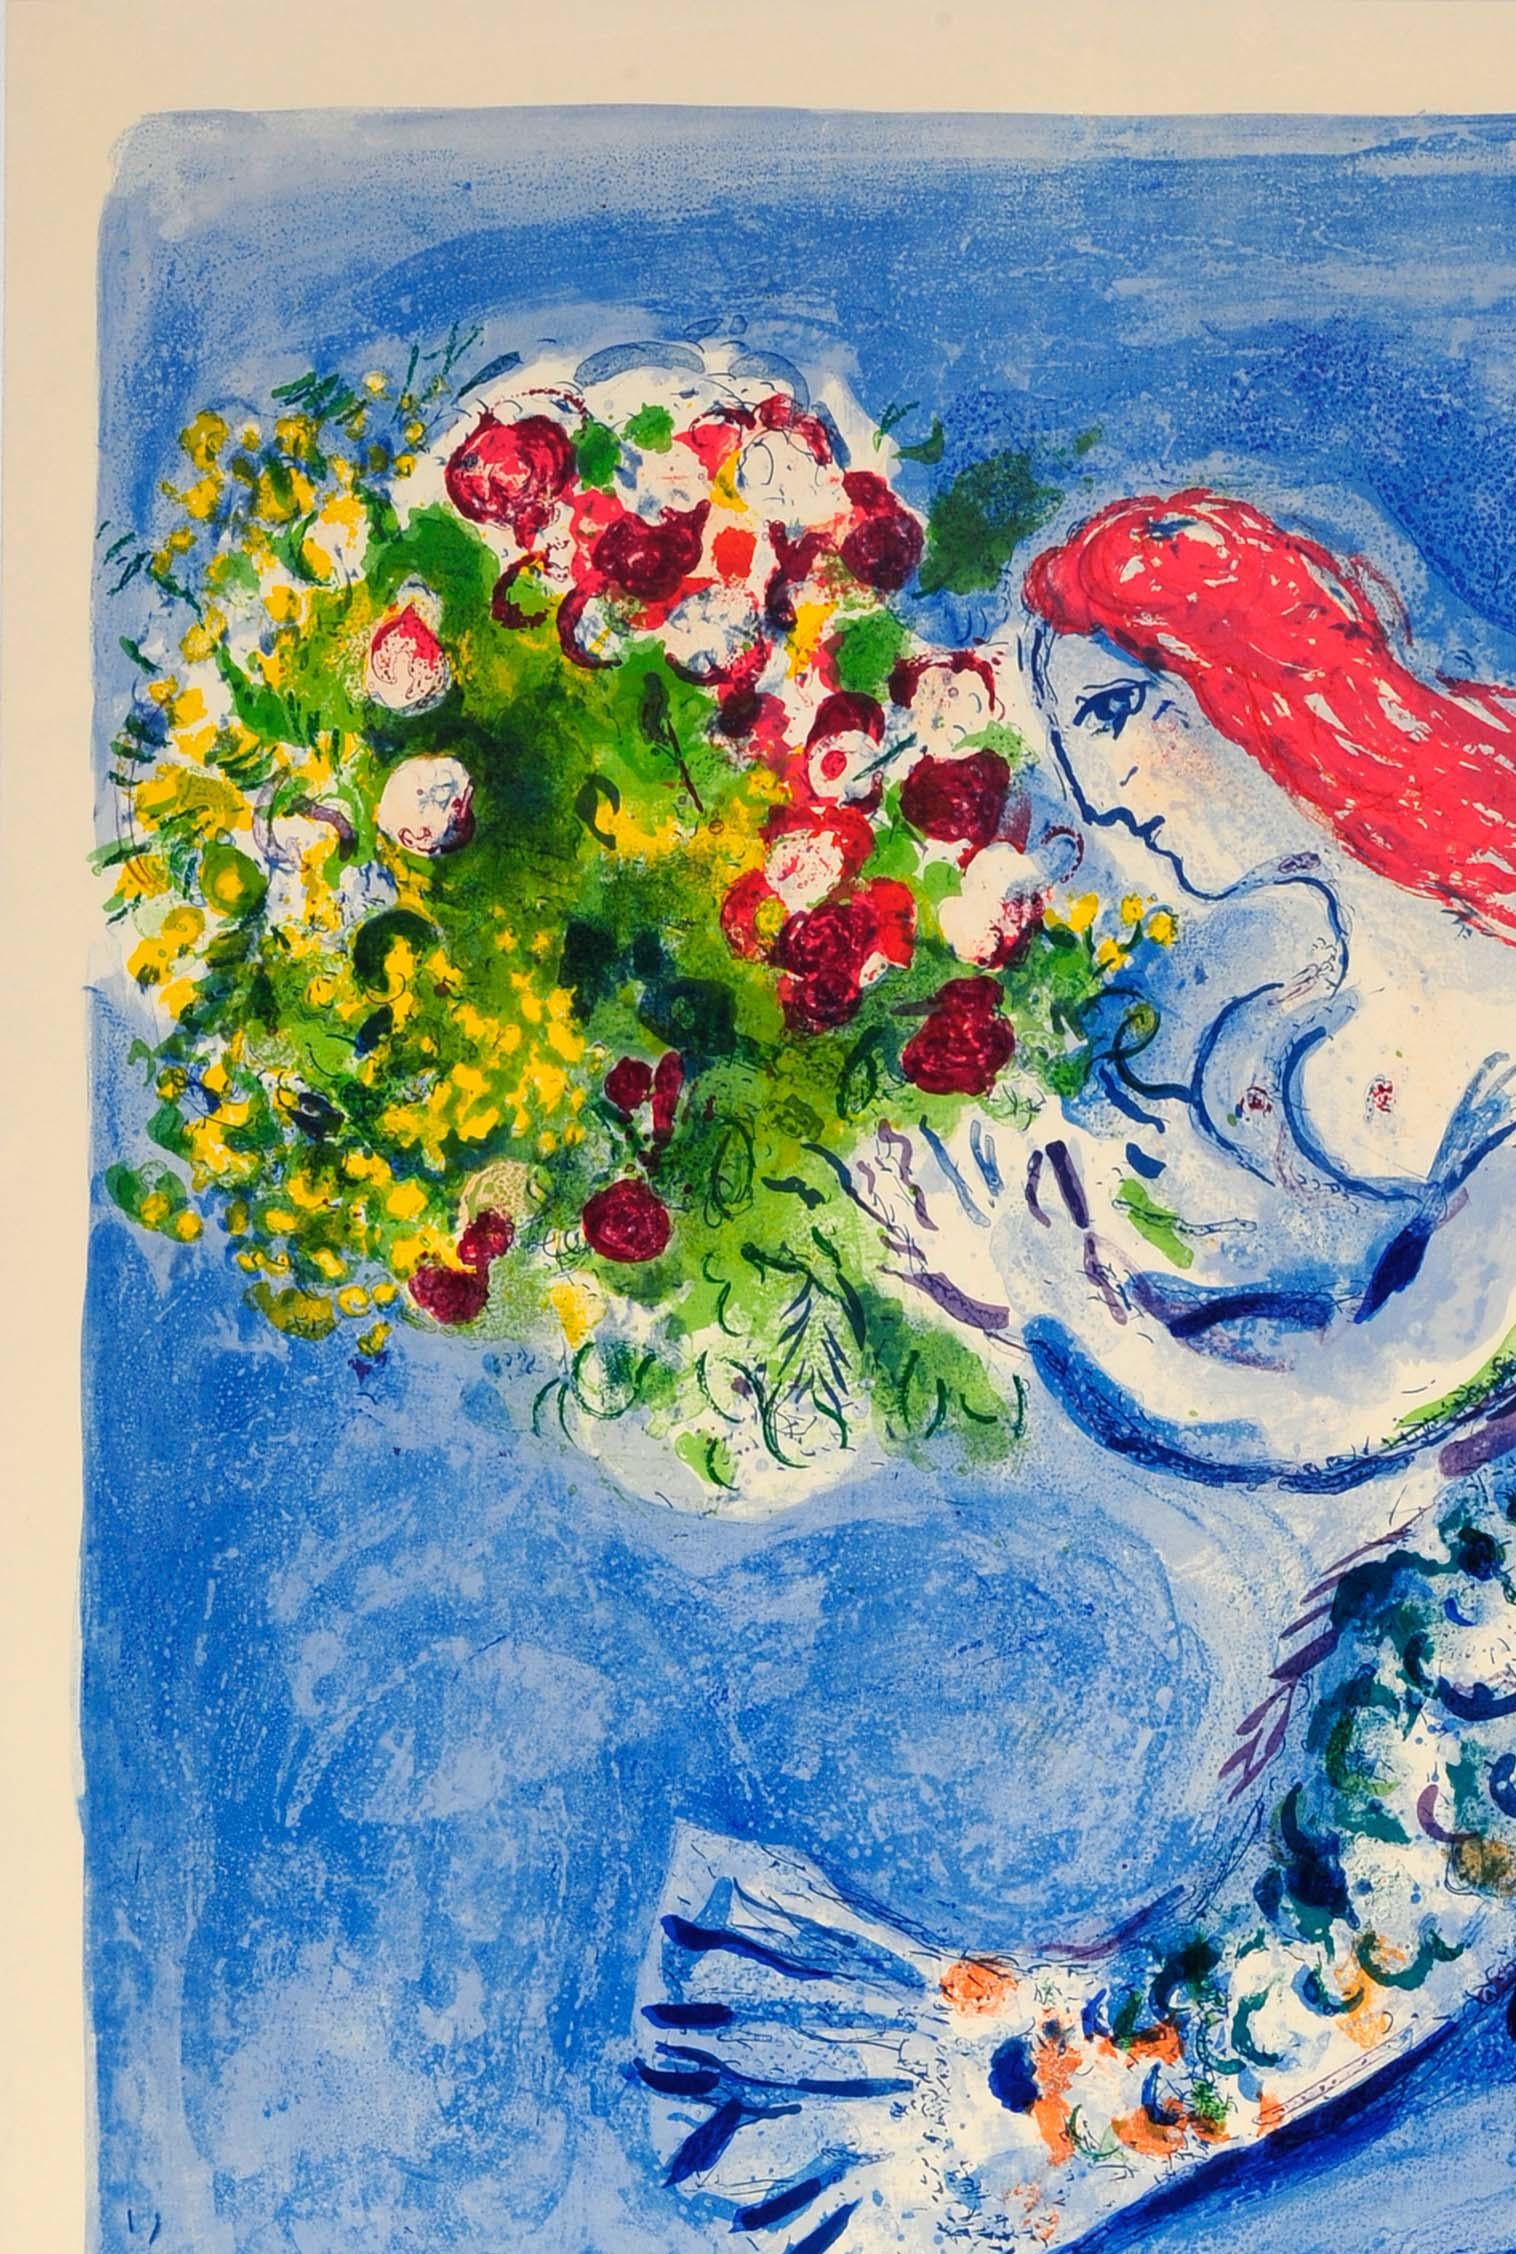 Original vintage travel poster advertising the French city of Nice - Soleil Fleurs / Sun Flowers - featuring a colorful illustration by the notable Russian/French modernist artist Marc Chagall (1887-1985) of a mermaid holding a bunch of flowers